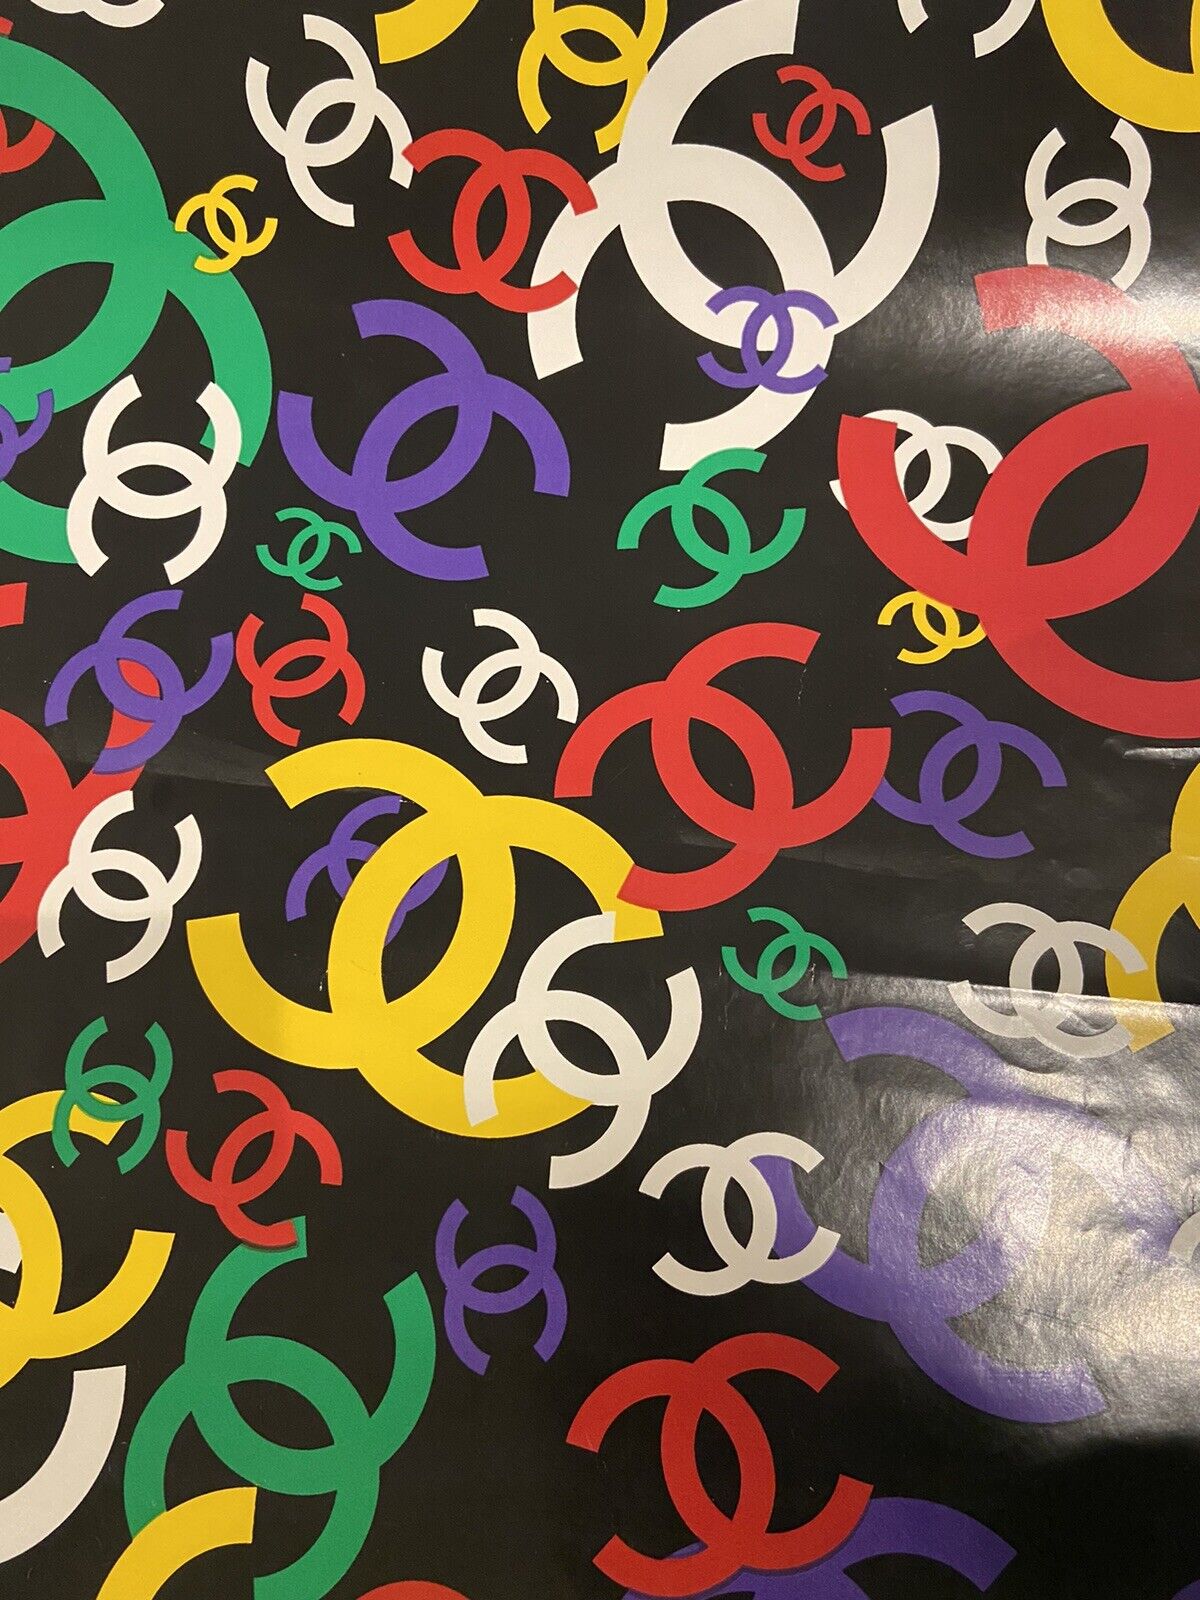 CHANEL CC COCO Chanel Authentic Gift Wrapping Paper by Yard 18 x 36  Vintage $25.00 - PicClick